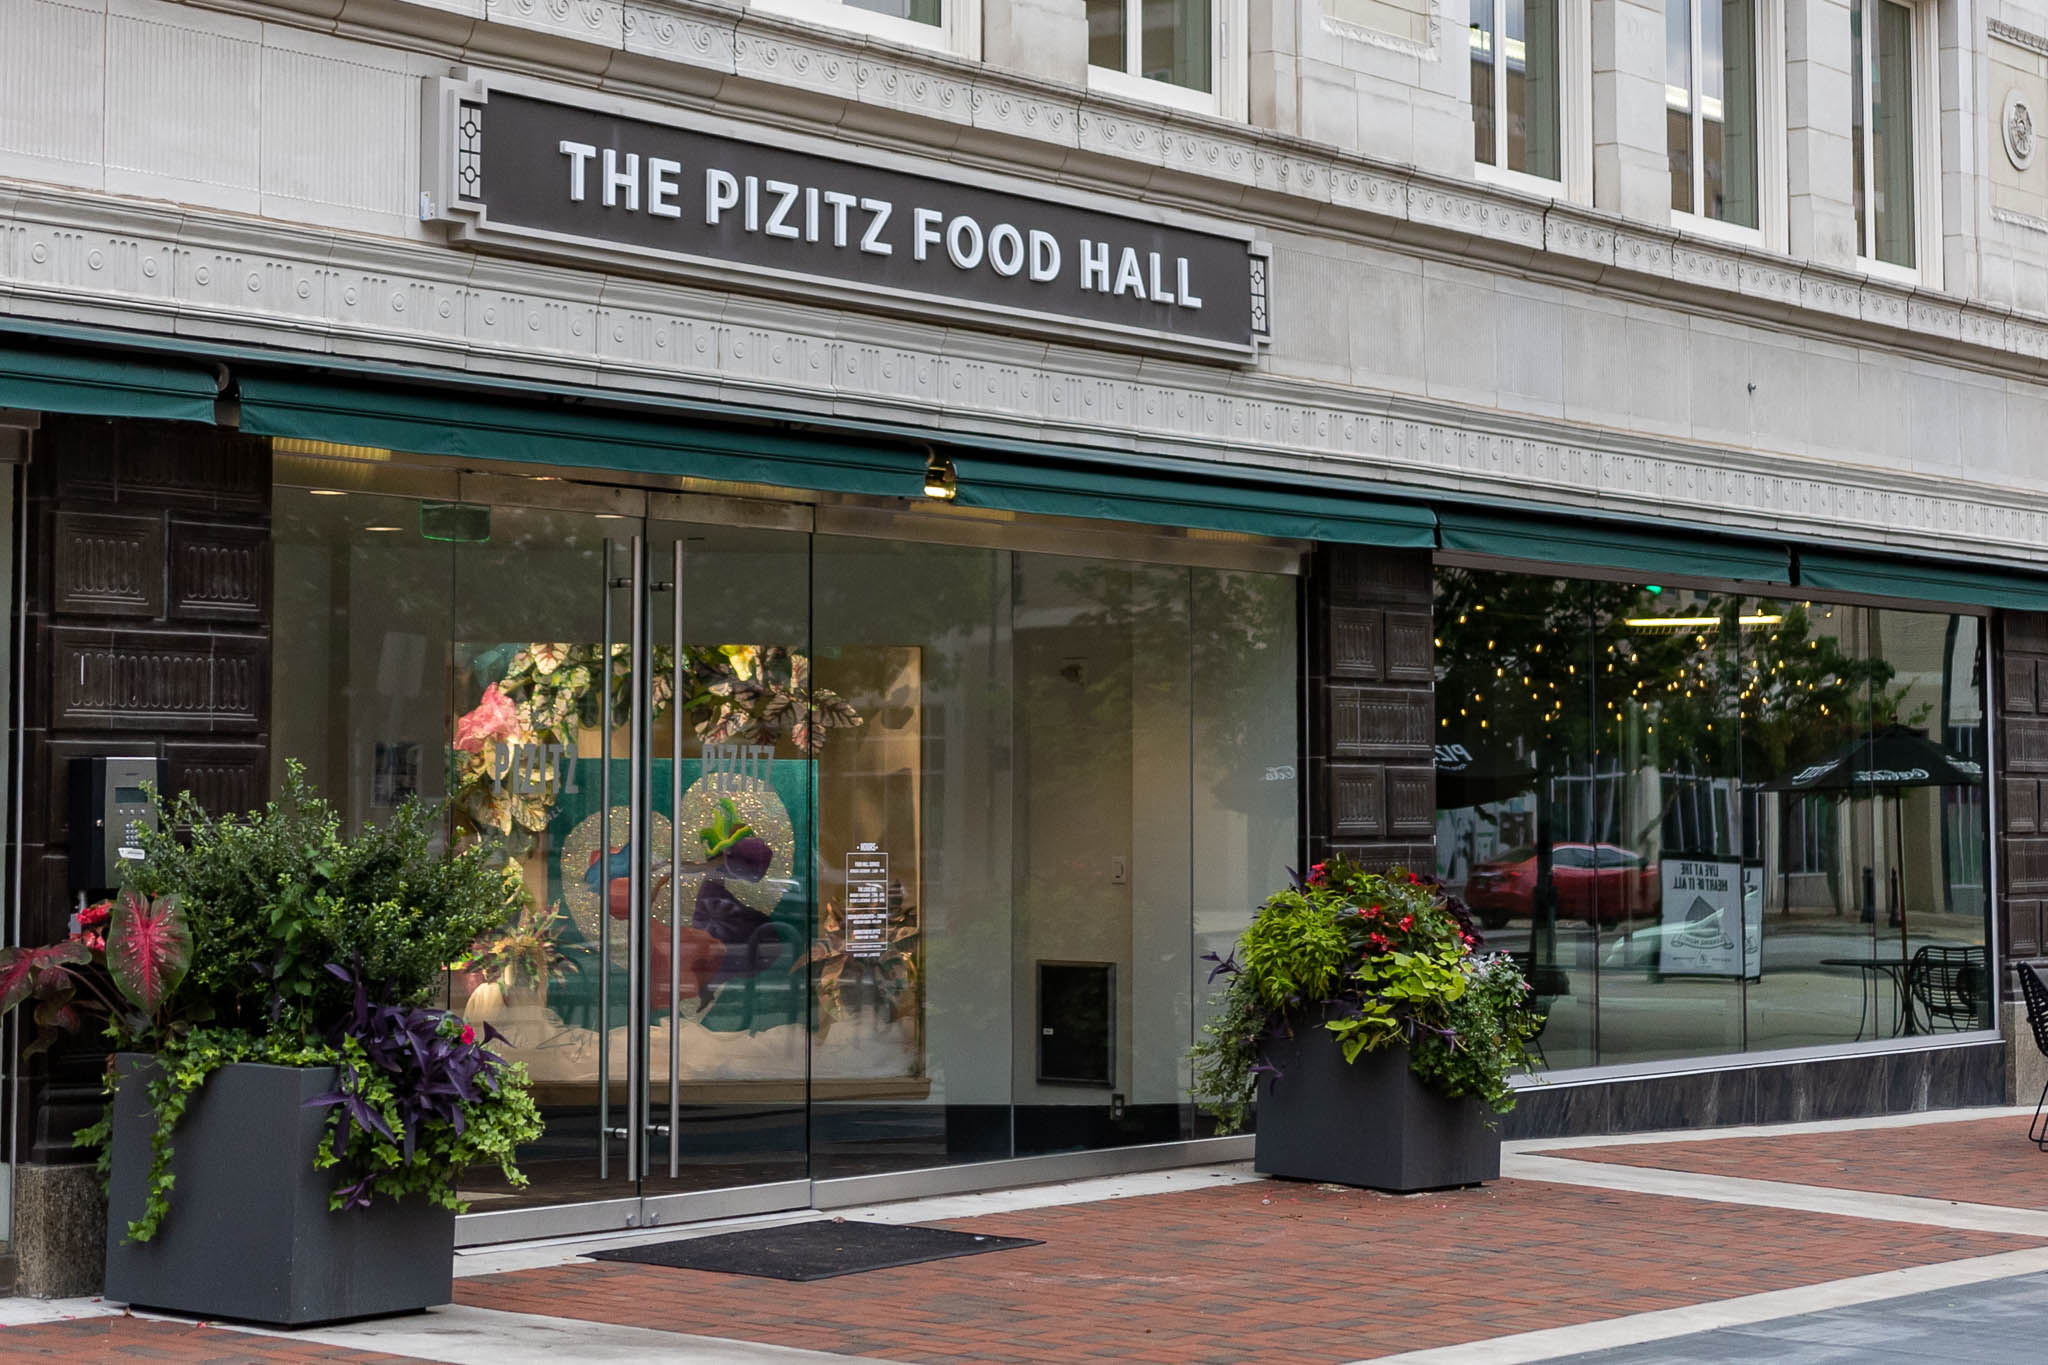 The Pizitz 27 23 Birmingham area festivals and events to look forward to this spring